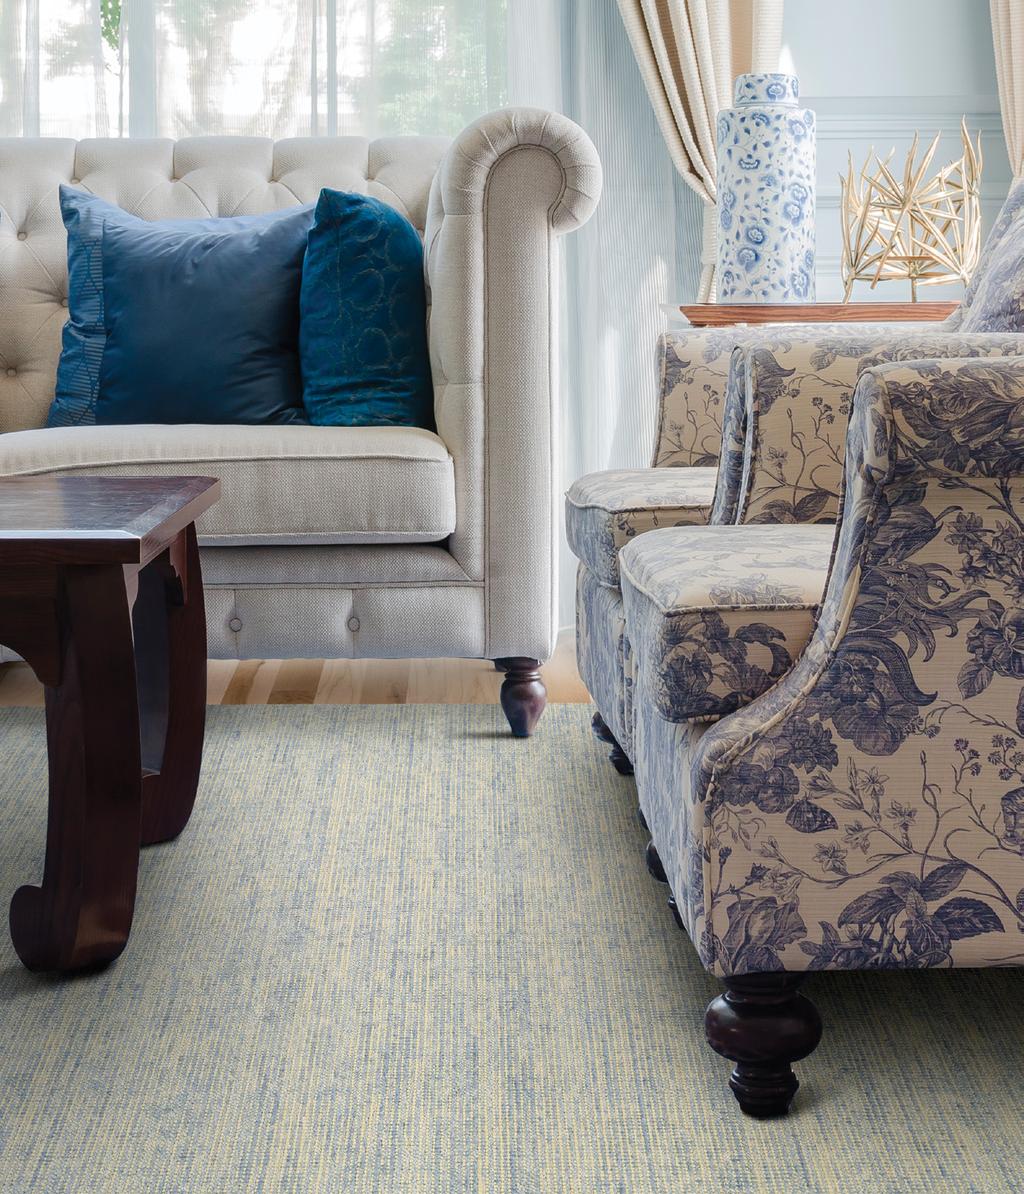 AREA RUG APPEARANCE AND CHARACTERISTICS We have included the following section in your Warranty, Care and Maintenance Information Booklet to help answer any questions pertaining to common